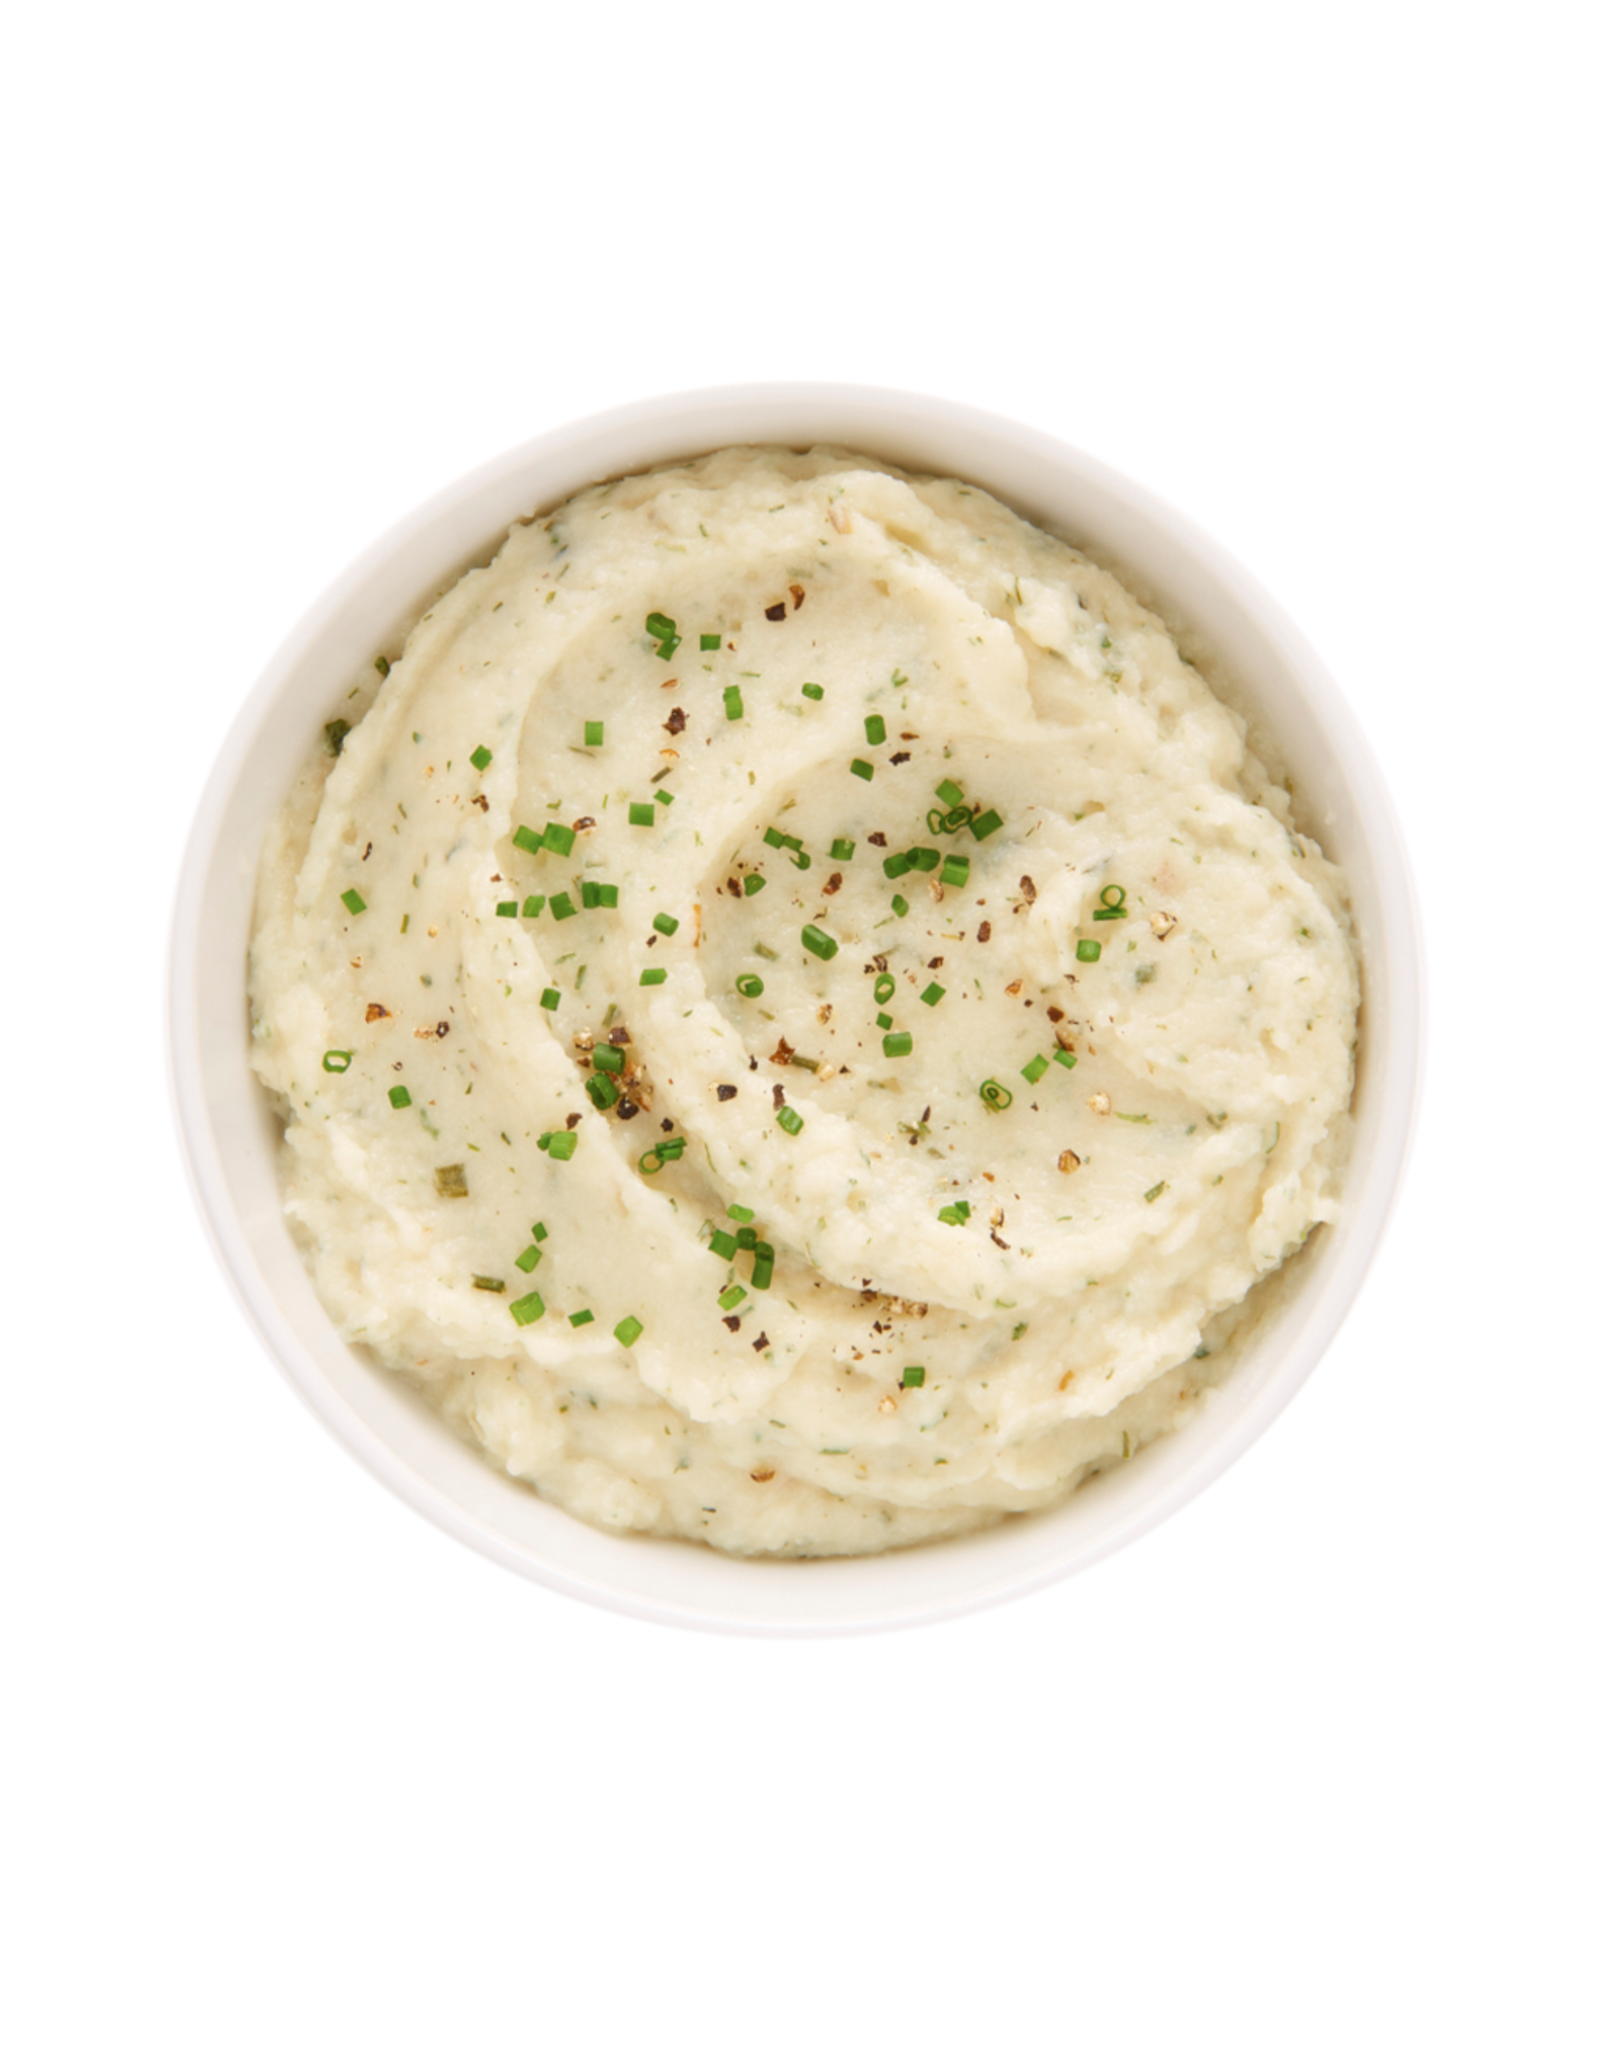 Ideal Protein Mashed Potatoes Mix